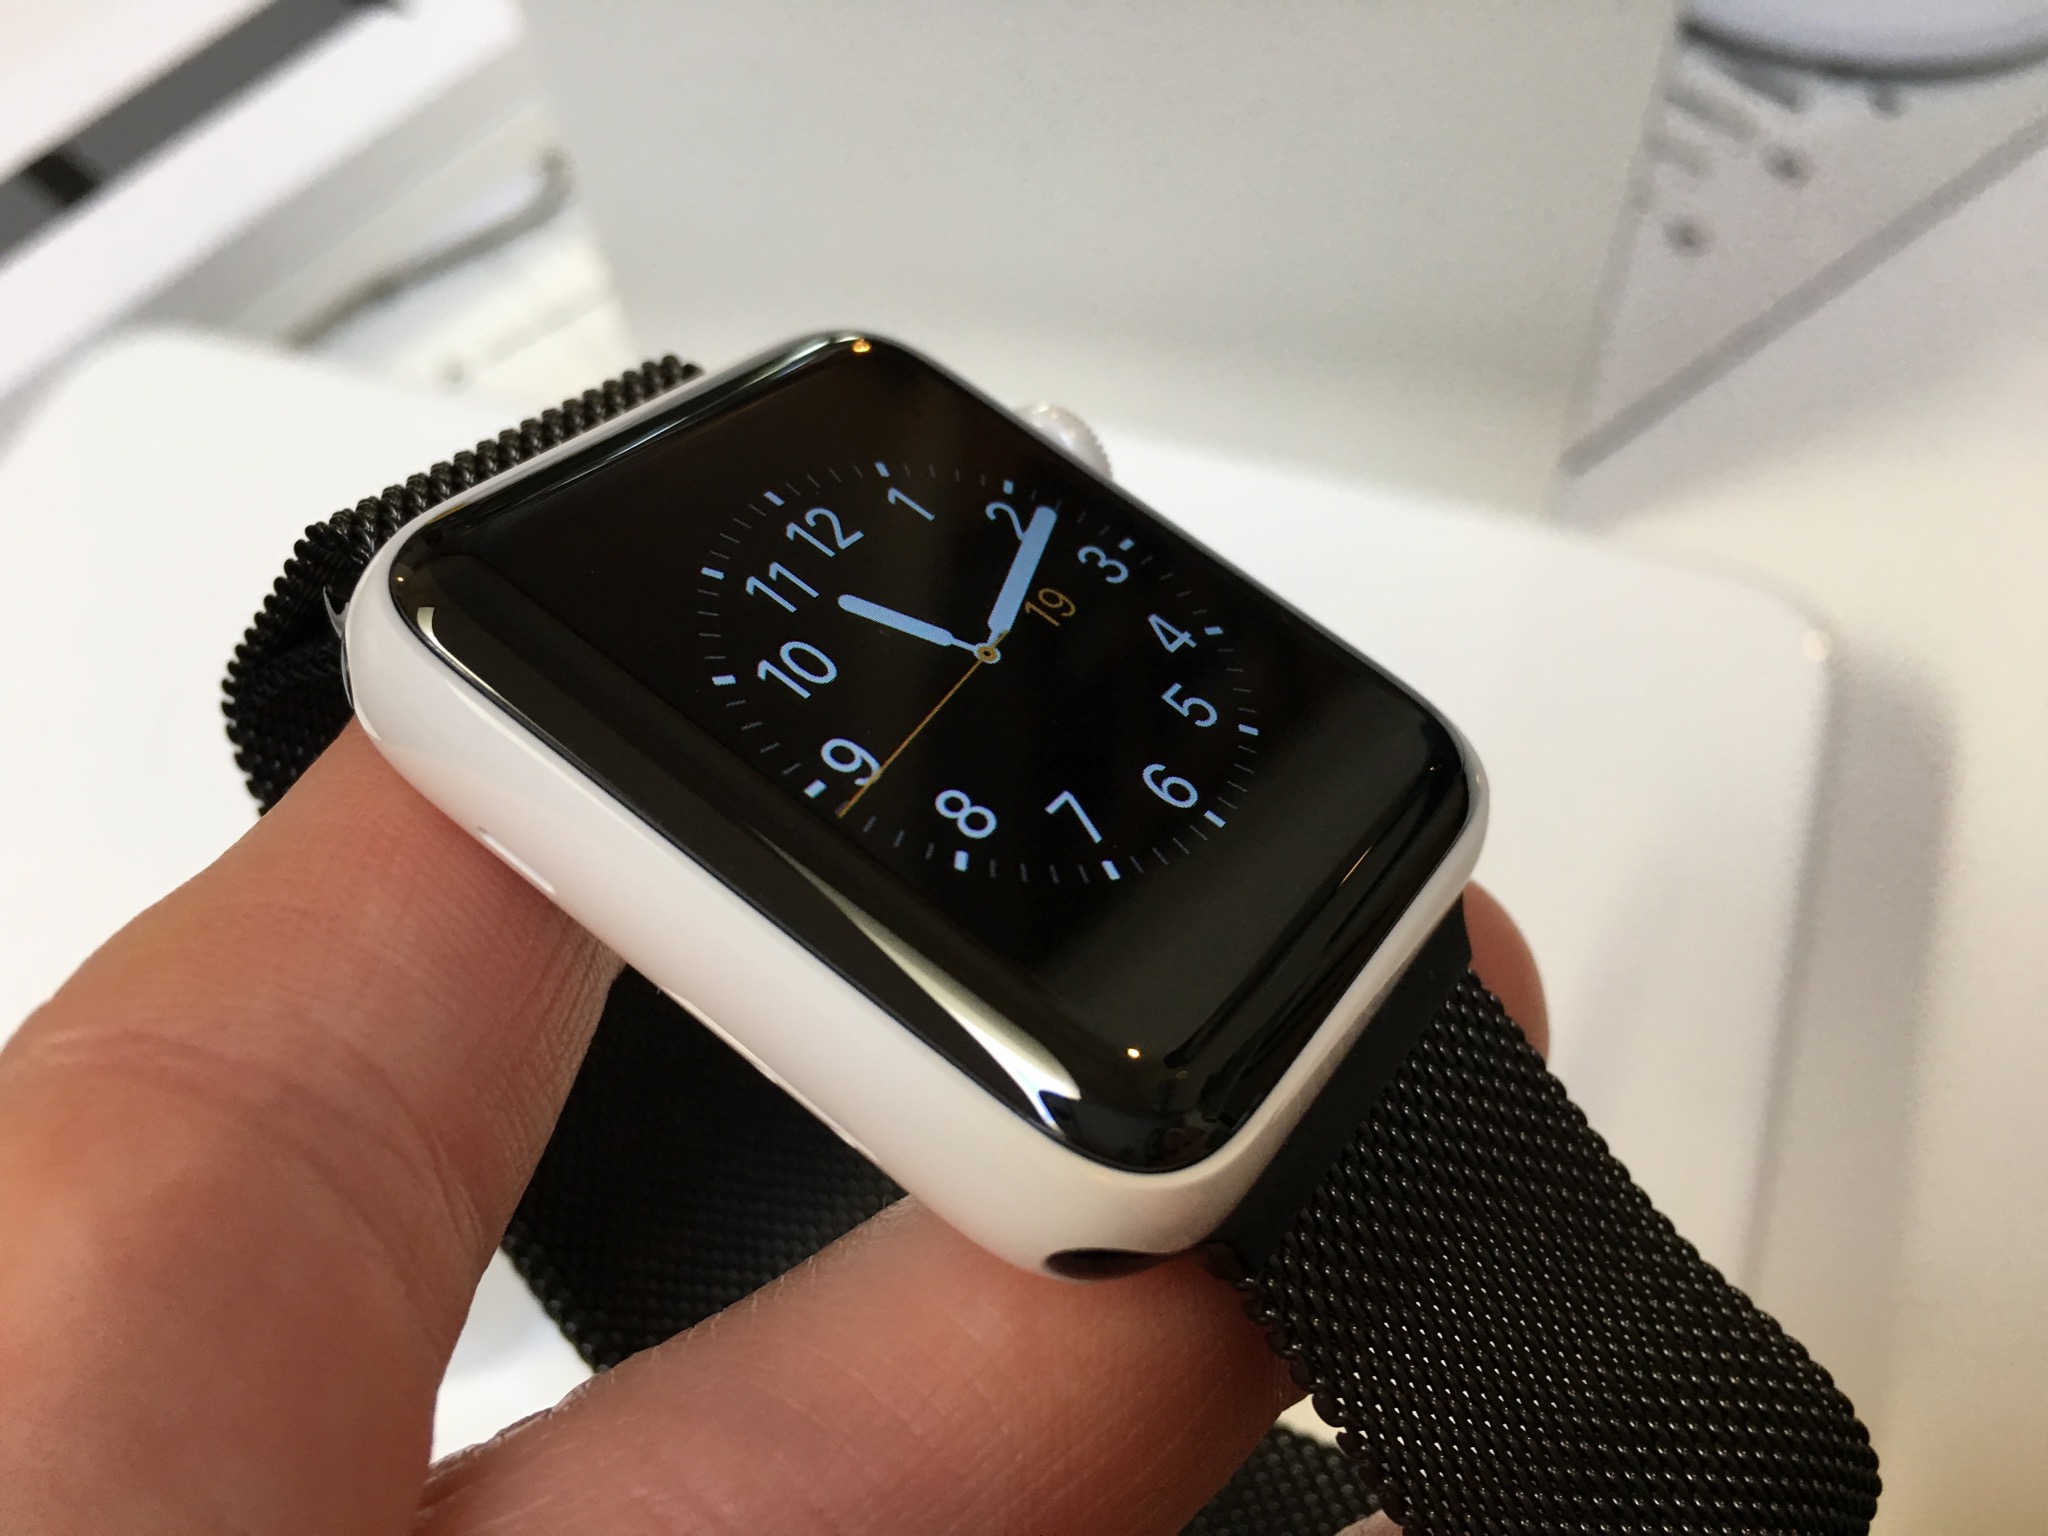 The new $1300 ceramic Apple Watch Edition Series 2 ships with an 